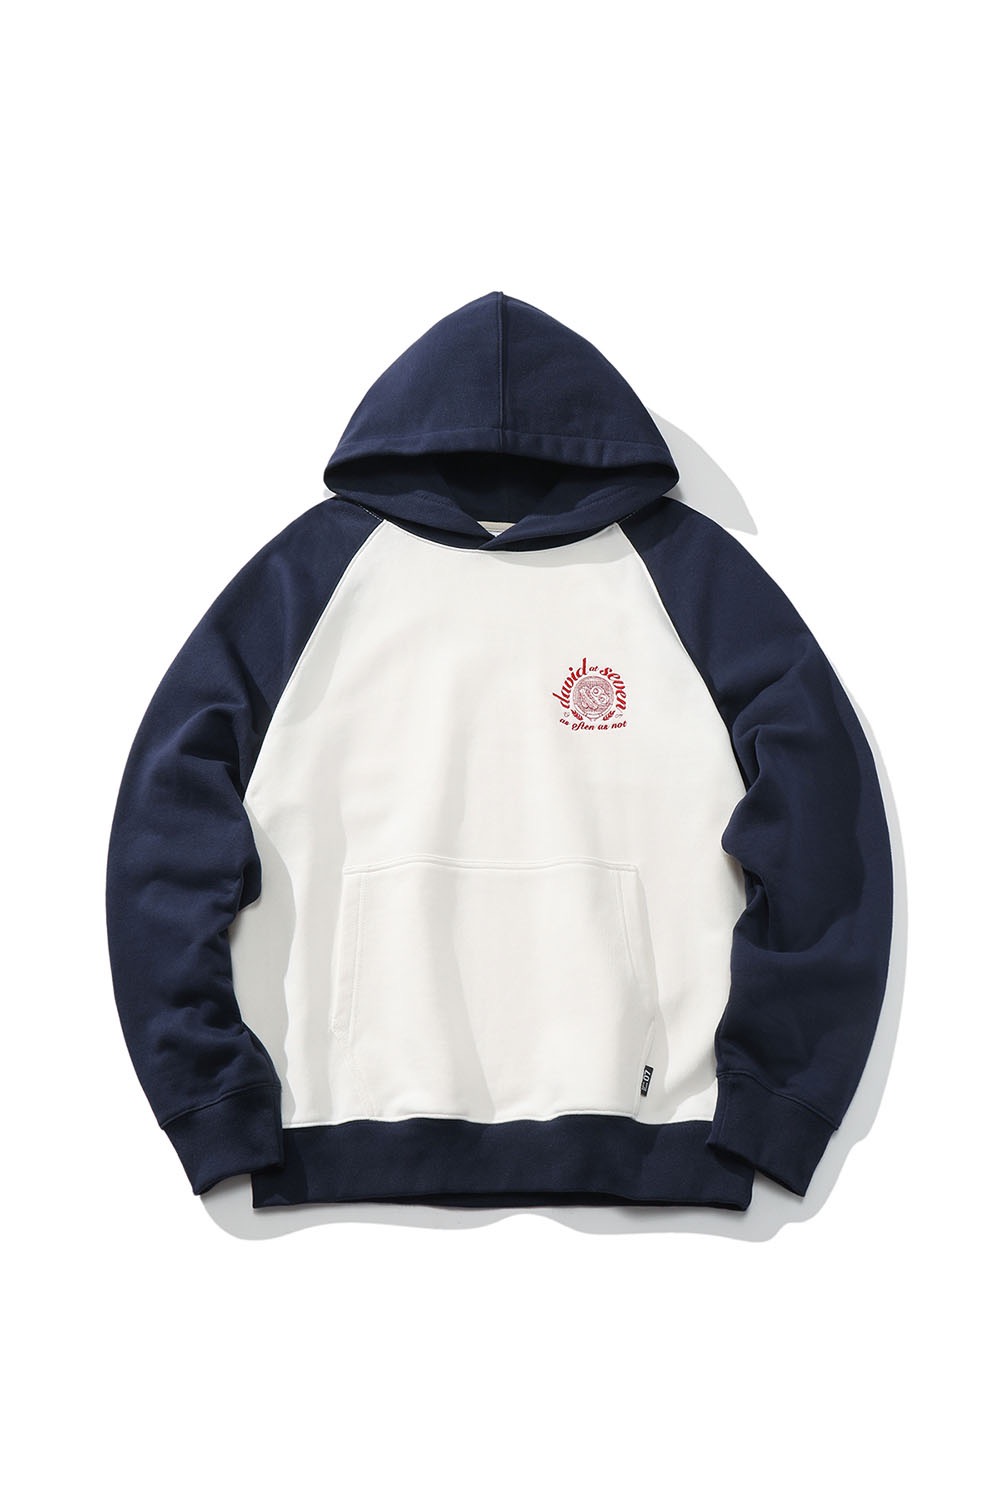 sunny-side up racket color block Hoodie (navy&amp;white) RICHEZ